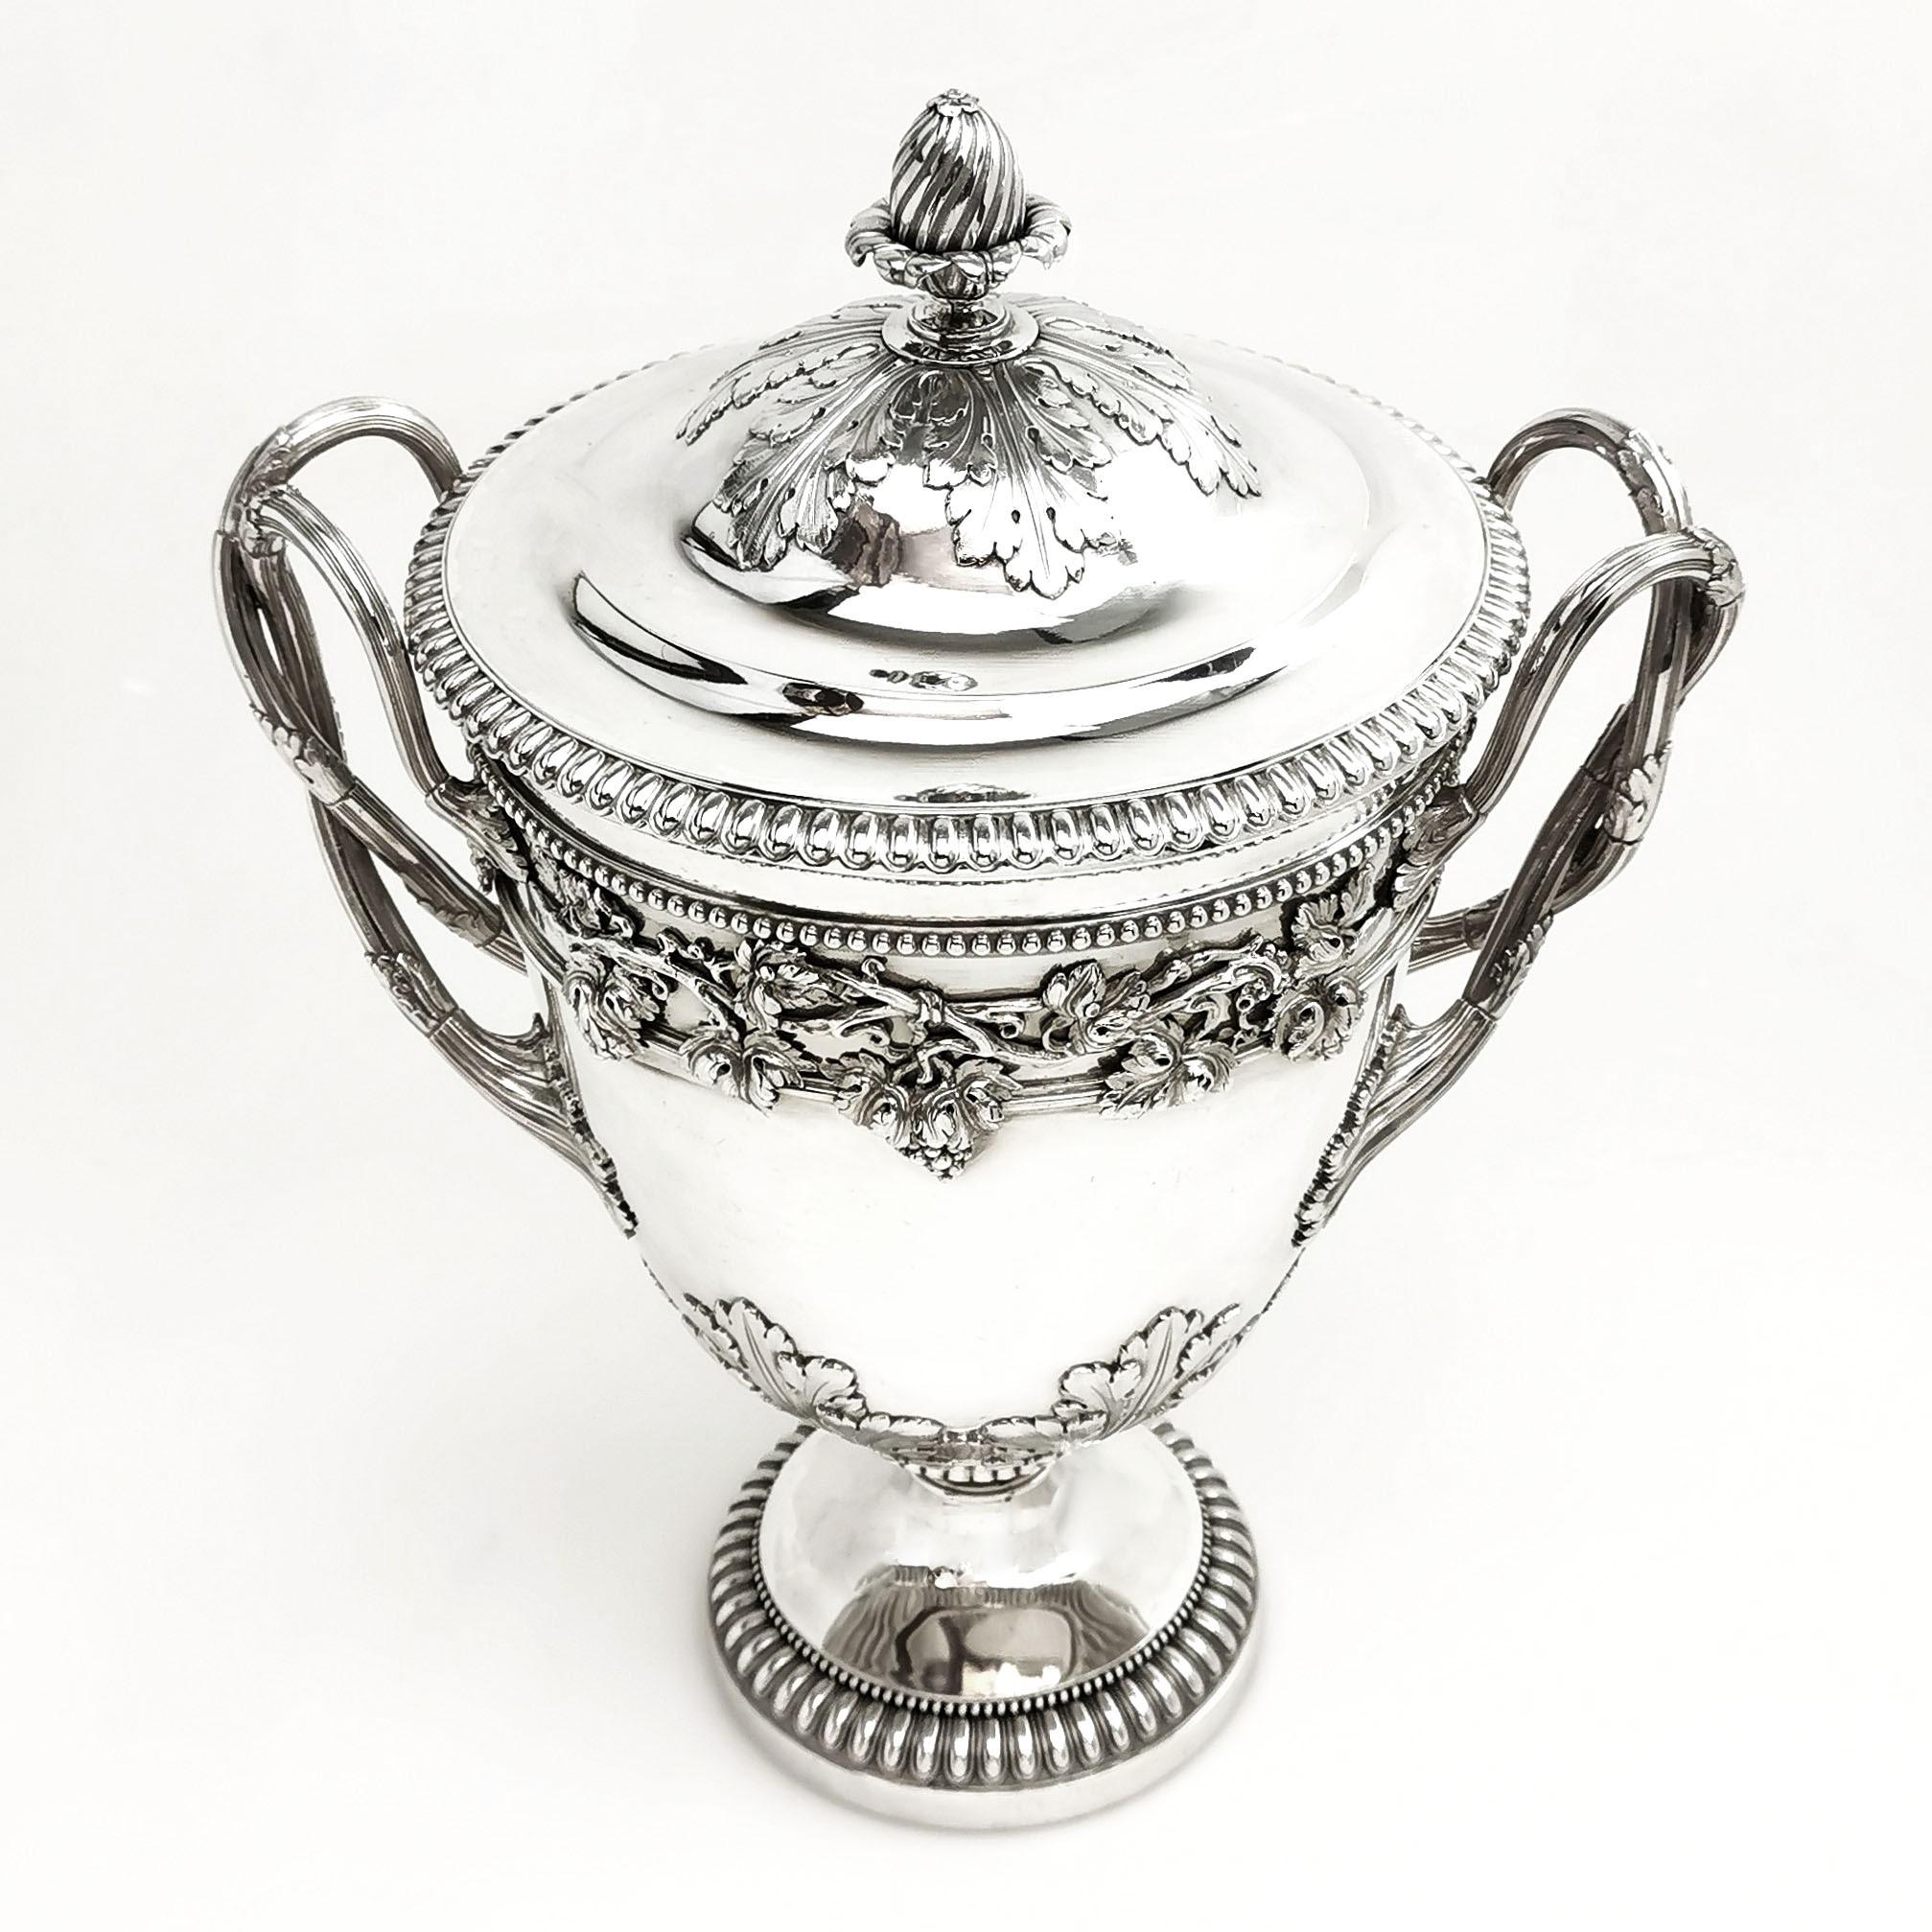 English Antique Georgian Sterling Silver Cup & Cover / Lidded Trophy 1812